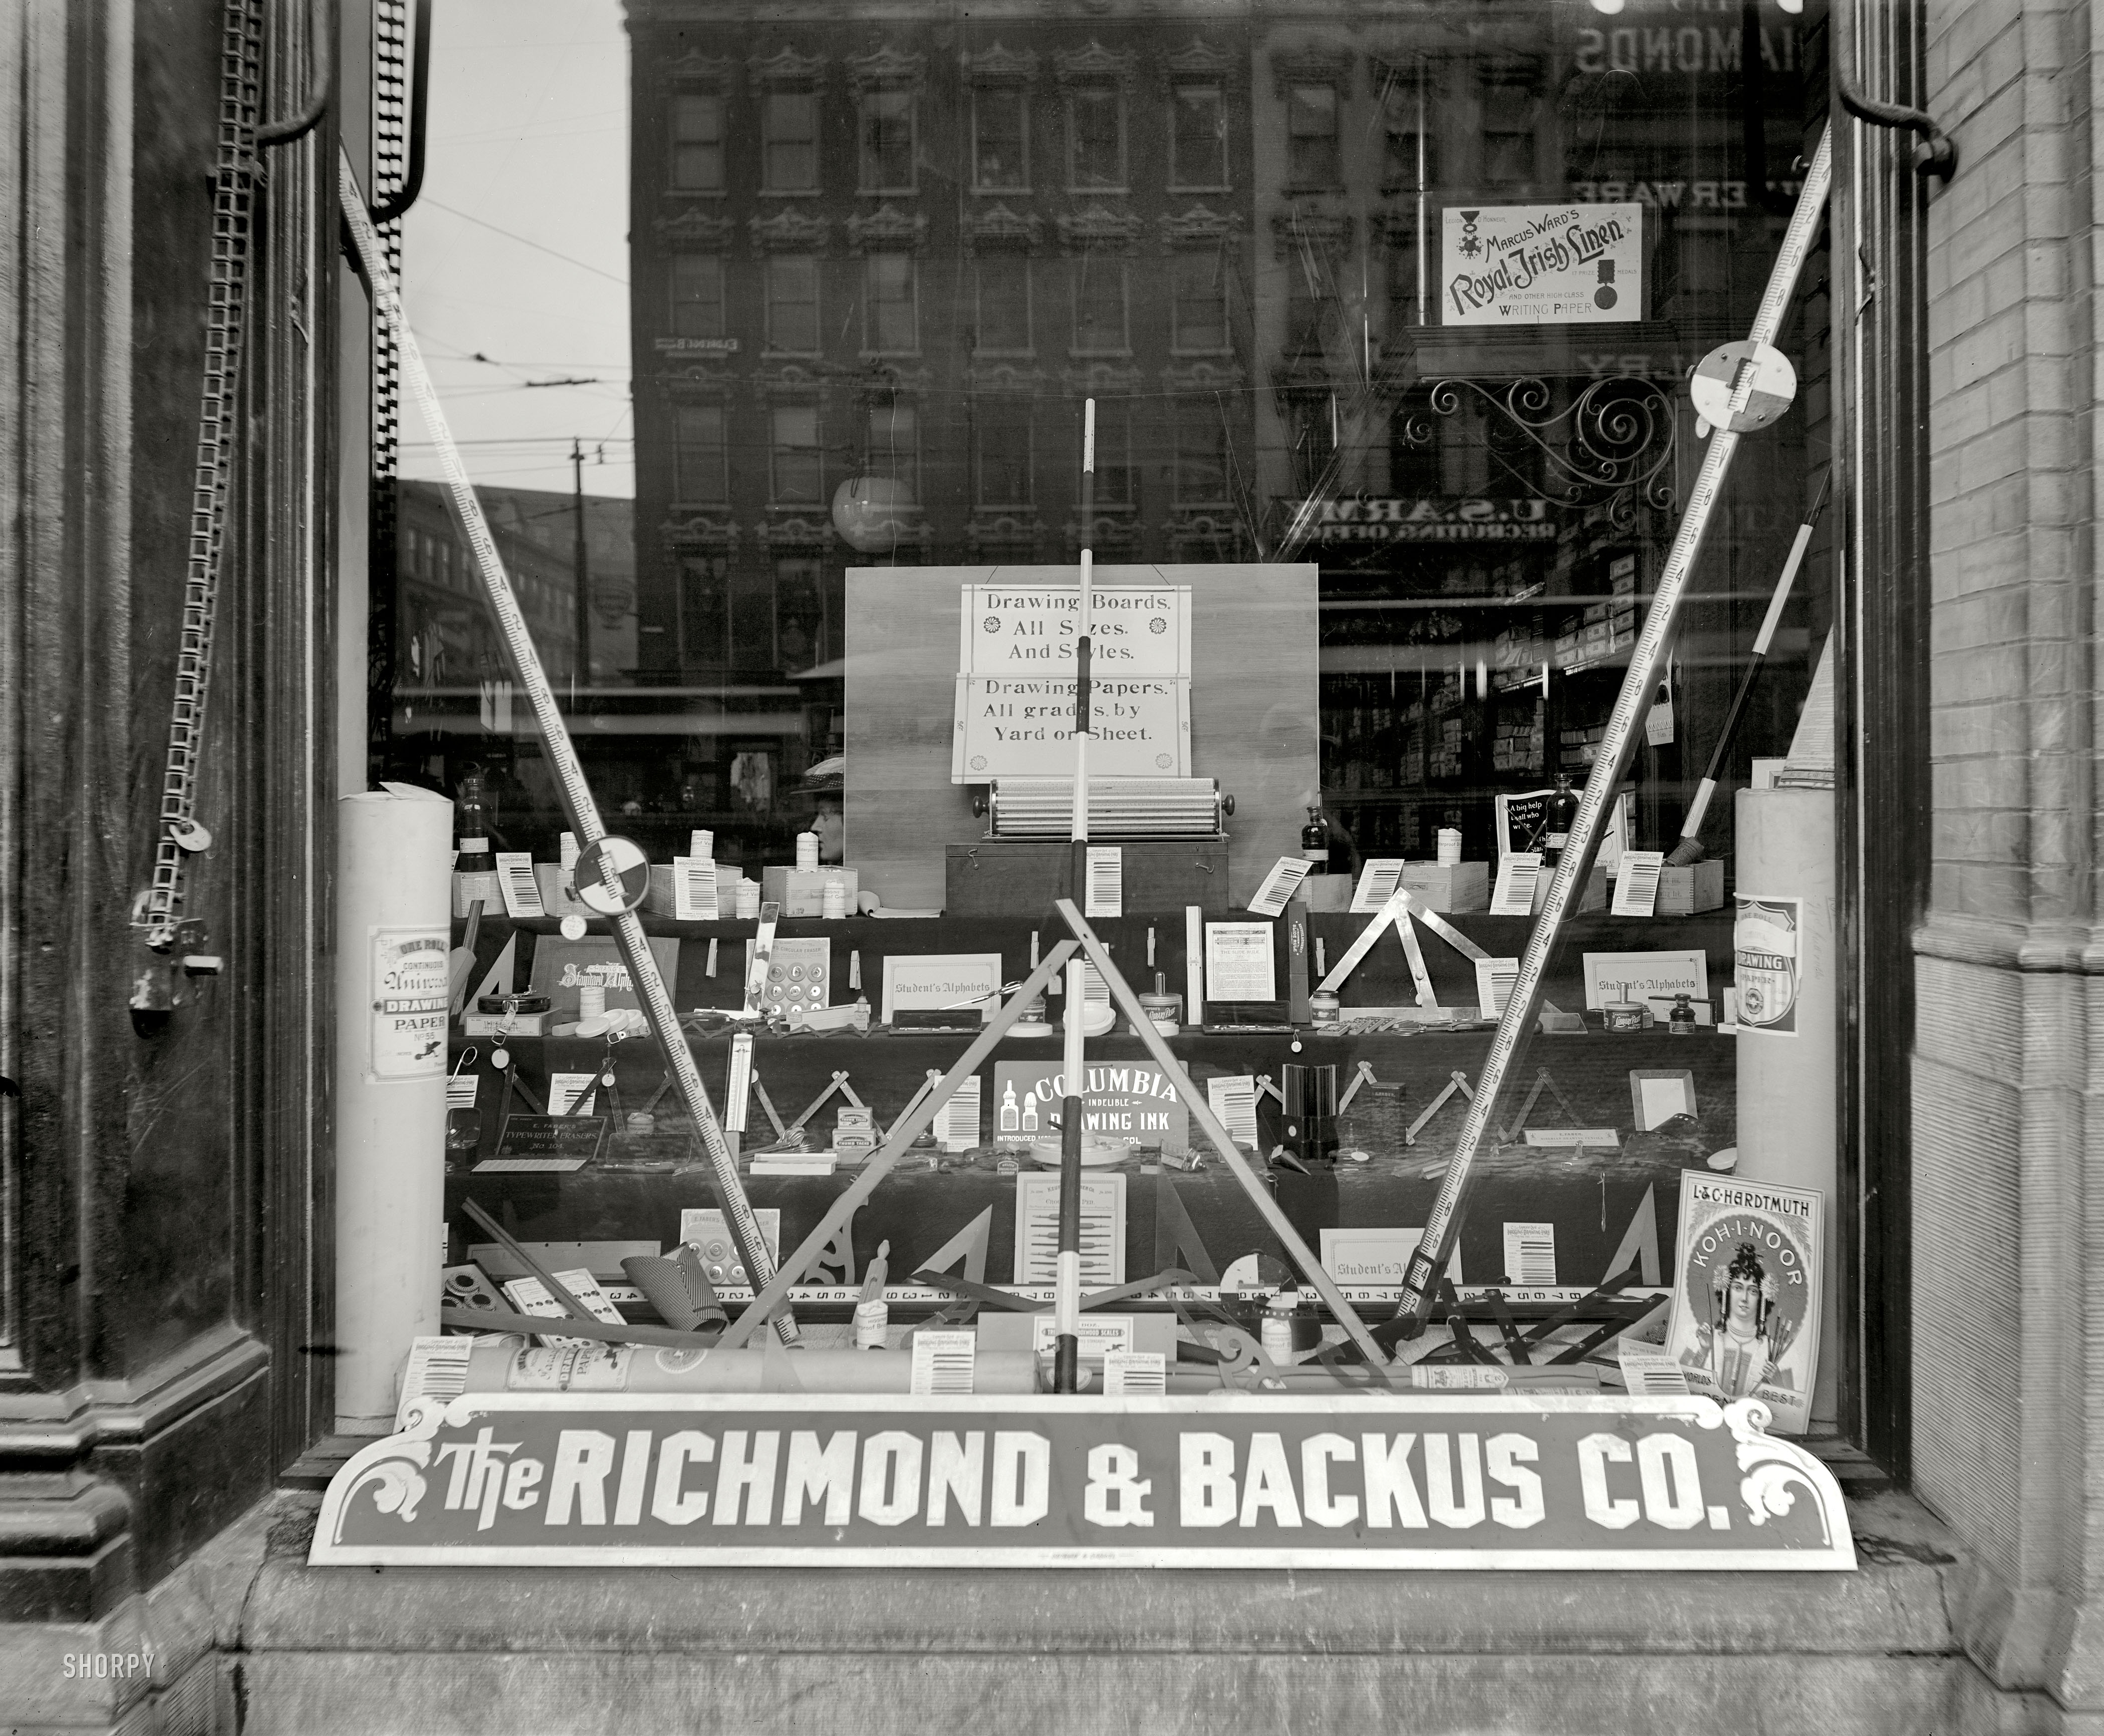 Detroit, Michigan, circa 1902: "Window display, art and drafting supplies." Our second look at Richmond & Backus, printers, binders and "office outfitters." 8x10 inch dry plate glass negative, Detroit Publishing Company. View full size.